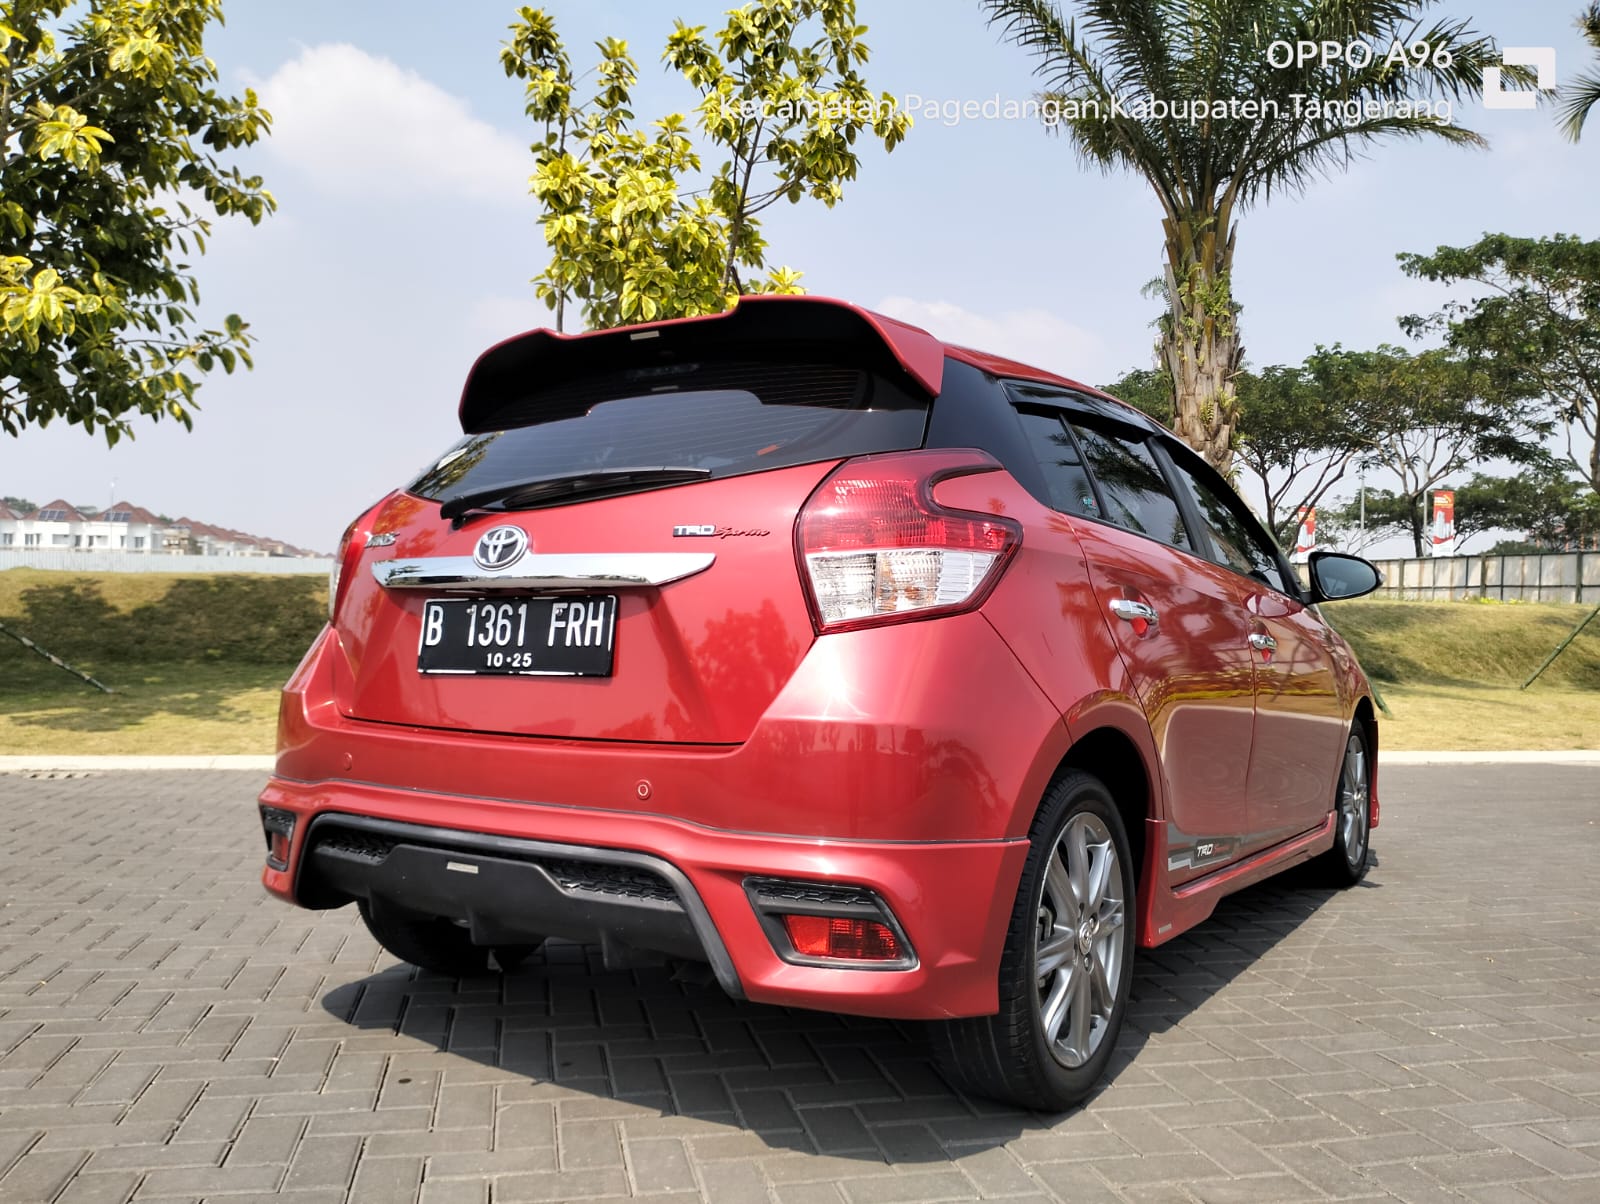 Used 2015 Toyota Yaris S TRD Sportivo 1.5L AT S TRD Sportivo 1.5L AT for sale